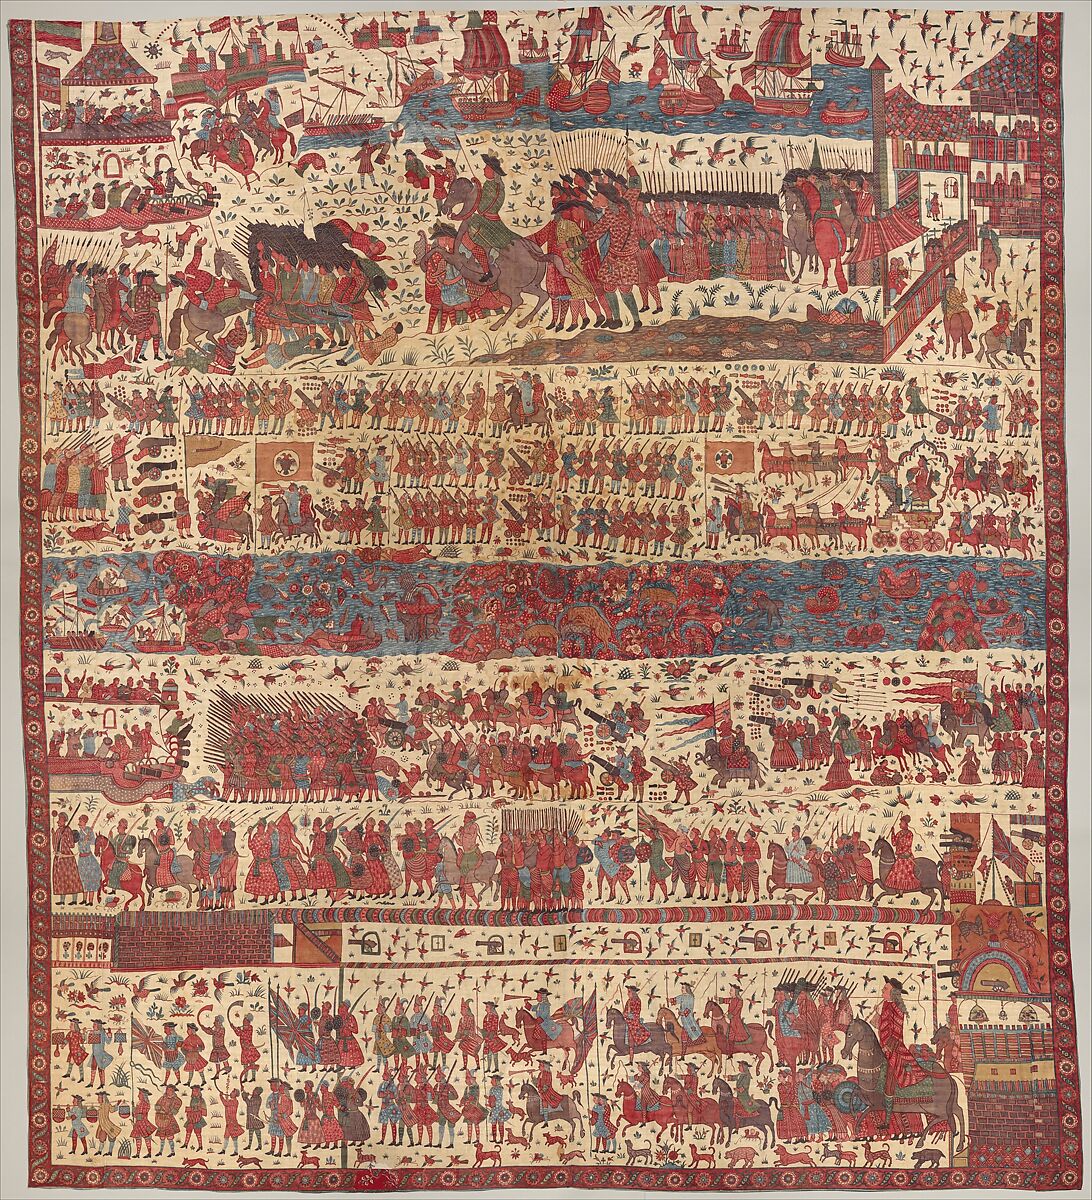 Hanging depicting a European conflict in South India, Cotton, plain weave (drawn and painted, mordant and resist dyed), Indian, Coromandel Coast, for British market 